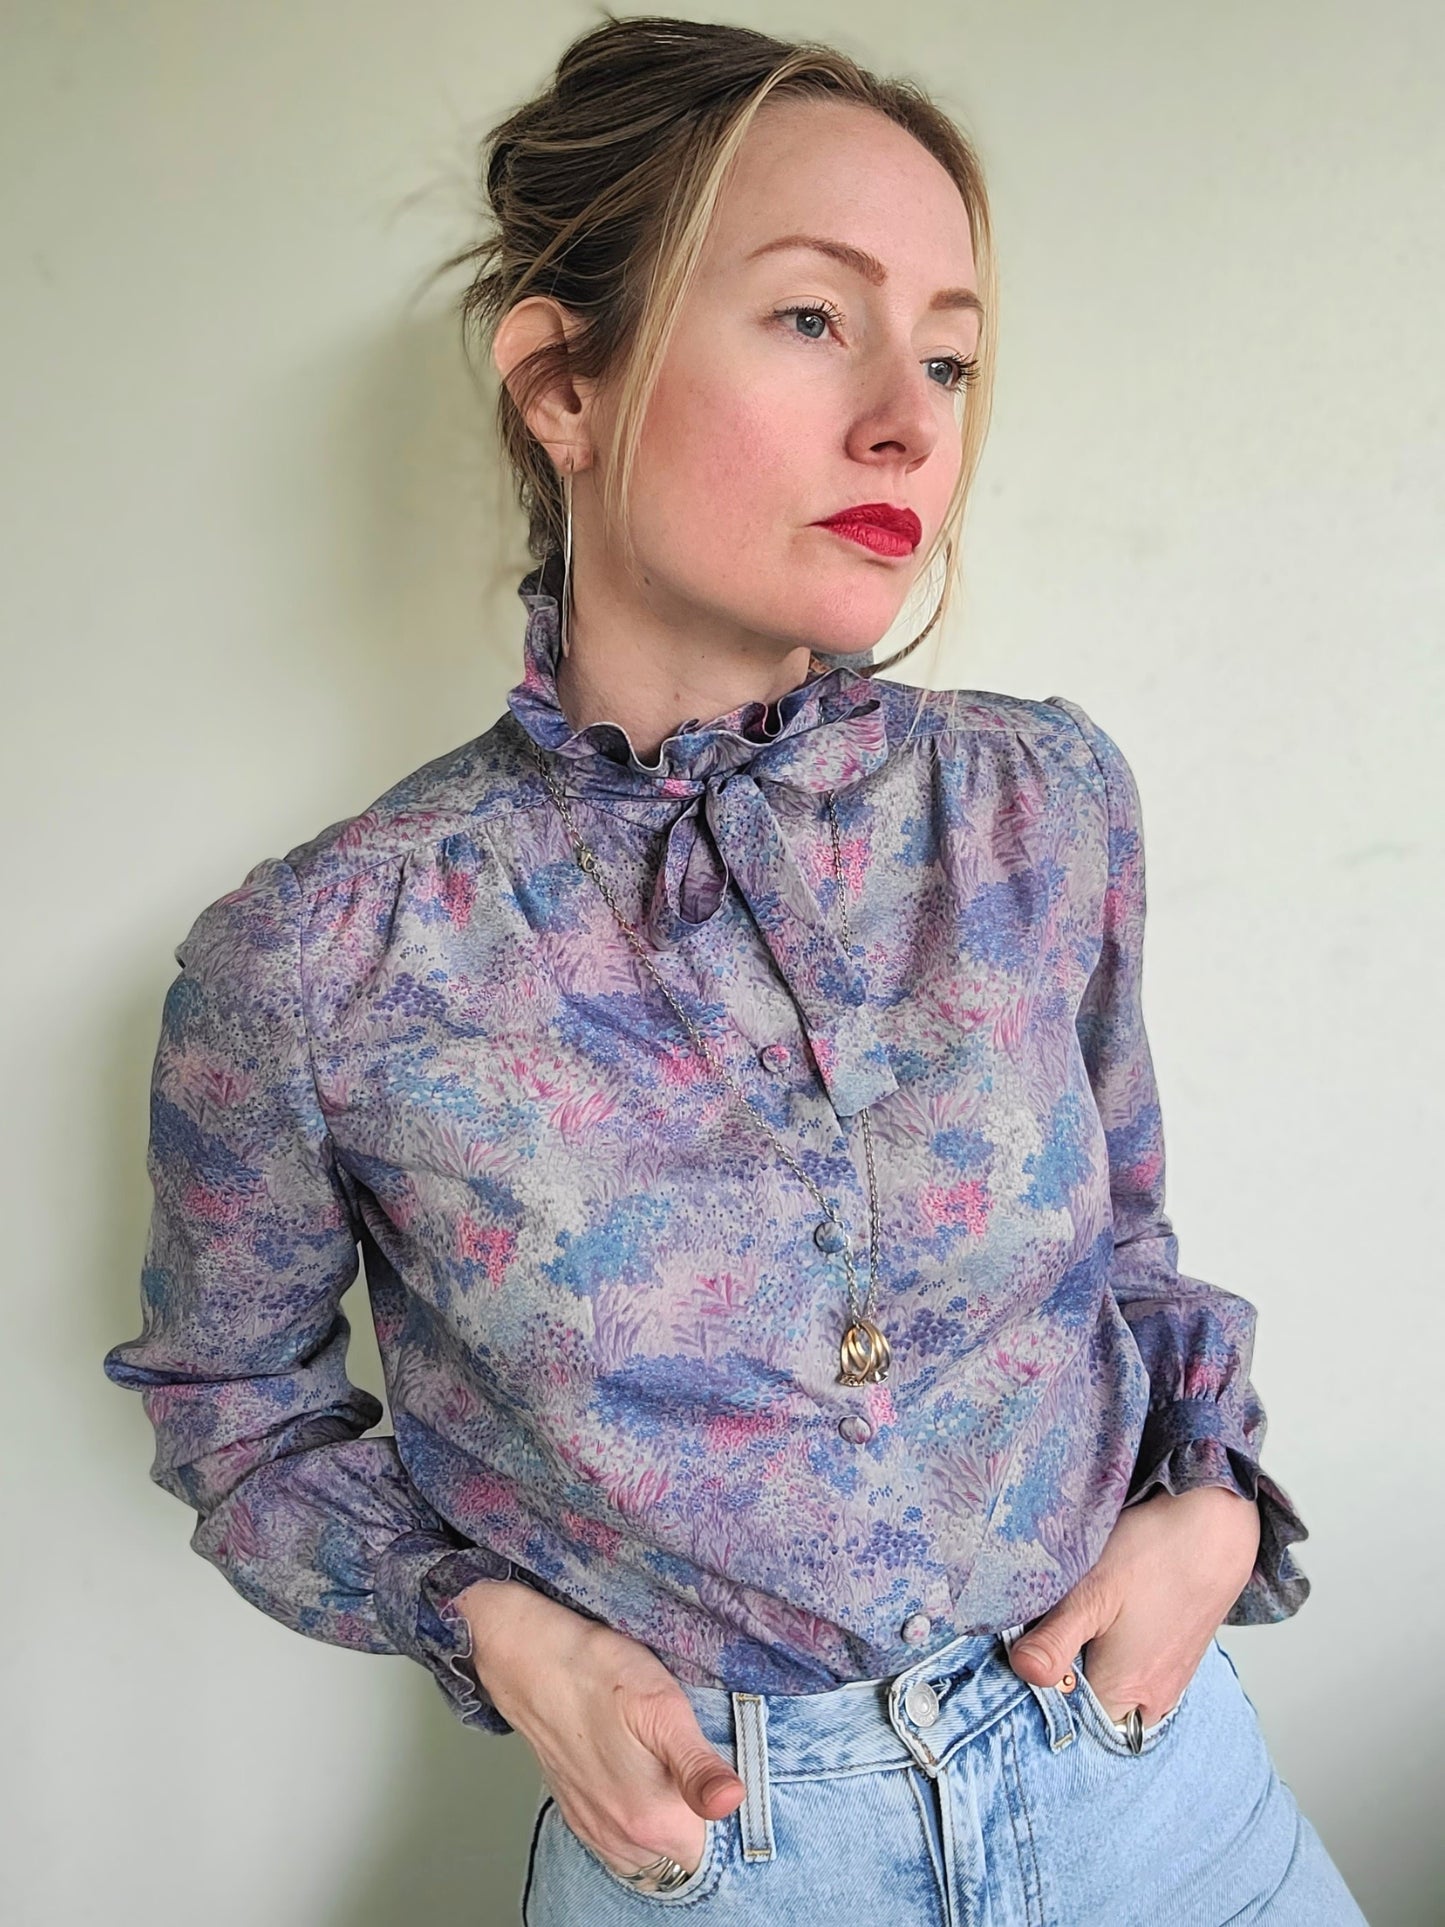 The Evening Watercolor Handmade Vintage Blouse S-M